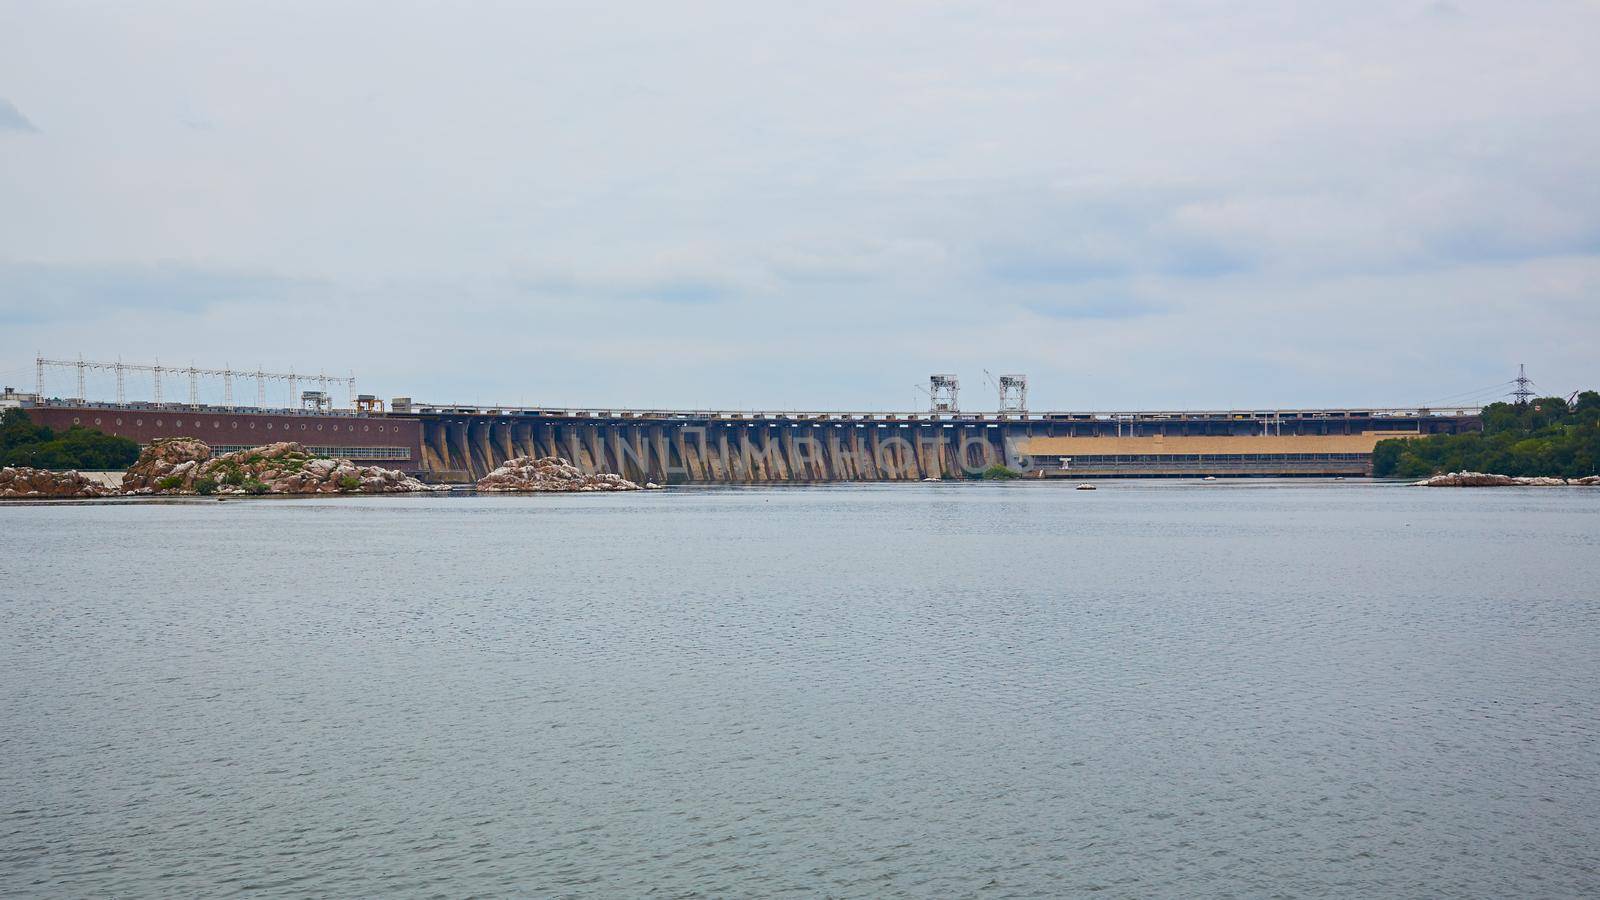 View of DneproGES in Zaporozhye. Hydroelectric power station on the Dnipro River in Ukraine. Power generation.